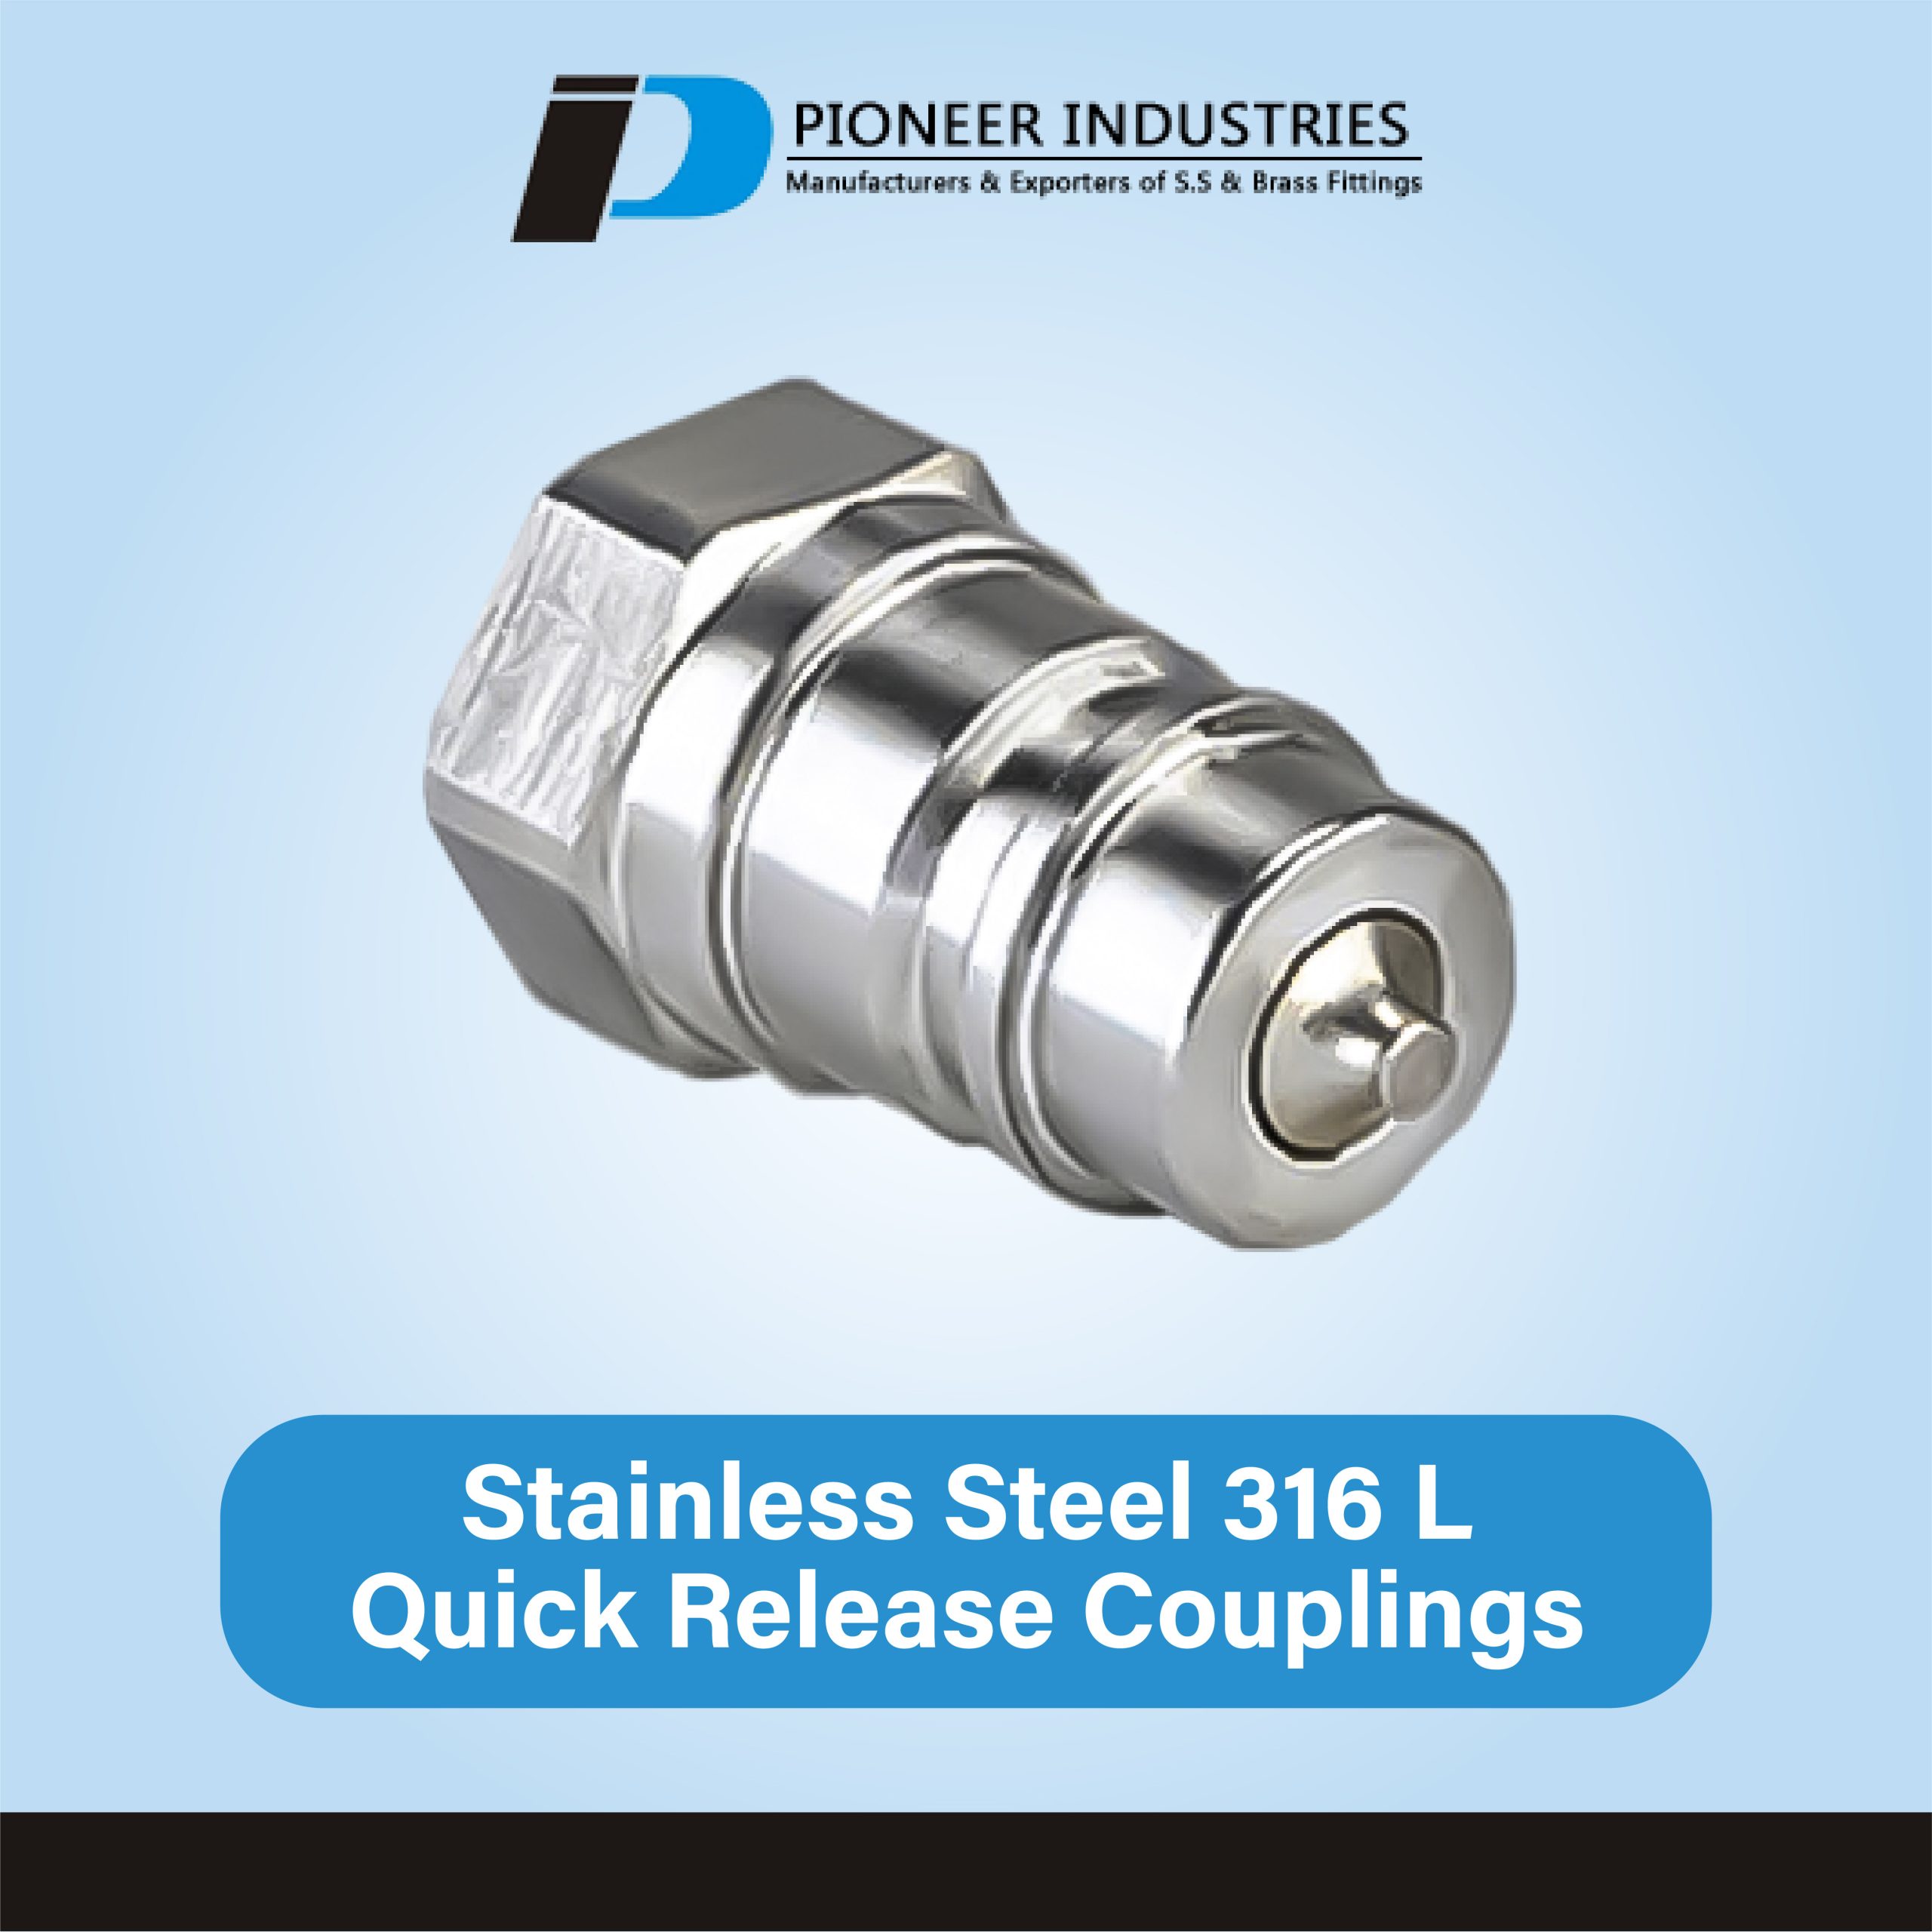 Stainless Steel 316 L Quick Release Couplings